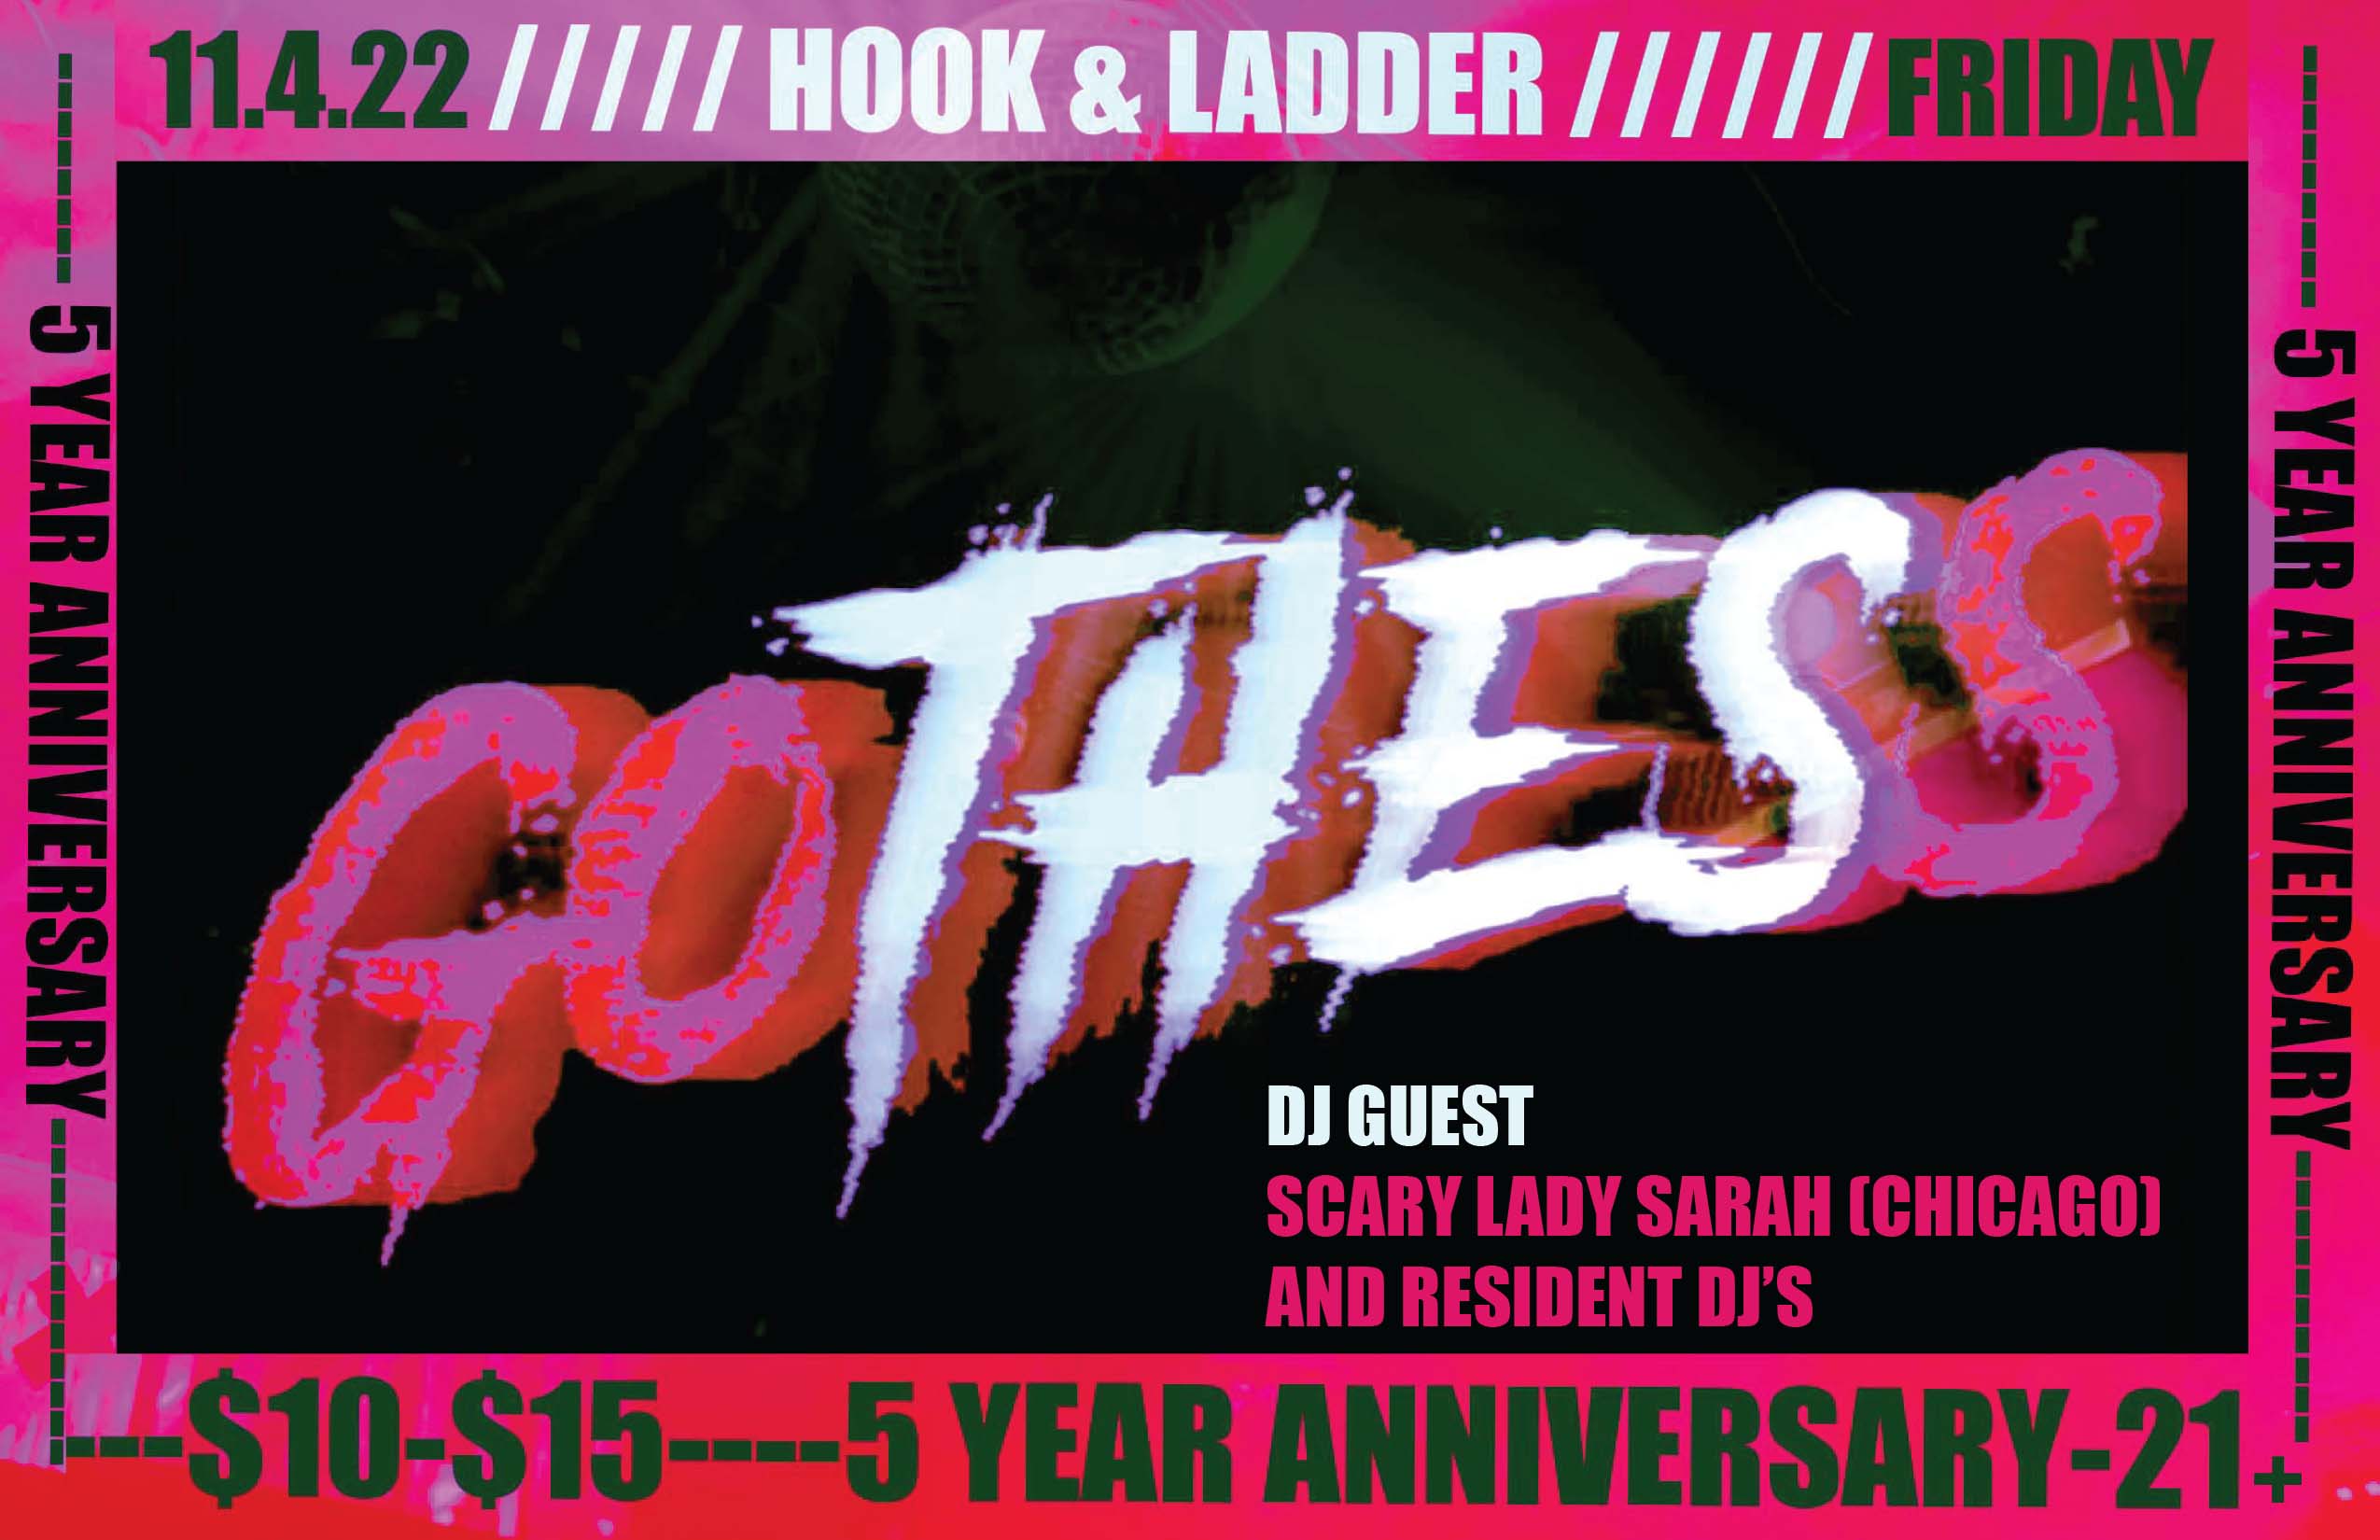 Gothess 5 Year Anniversary Guest DJ: Scary Lady Sarah (Chicago) + Resident DJs Friday November 4 The Hook and Ladder Theater Doors 10:00pm :: Music 10:00pm :: 21+ ----- General Admission * $10 ADV / $15 DOS * Does not include fees NO REFUNDS